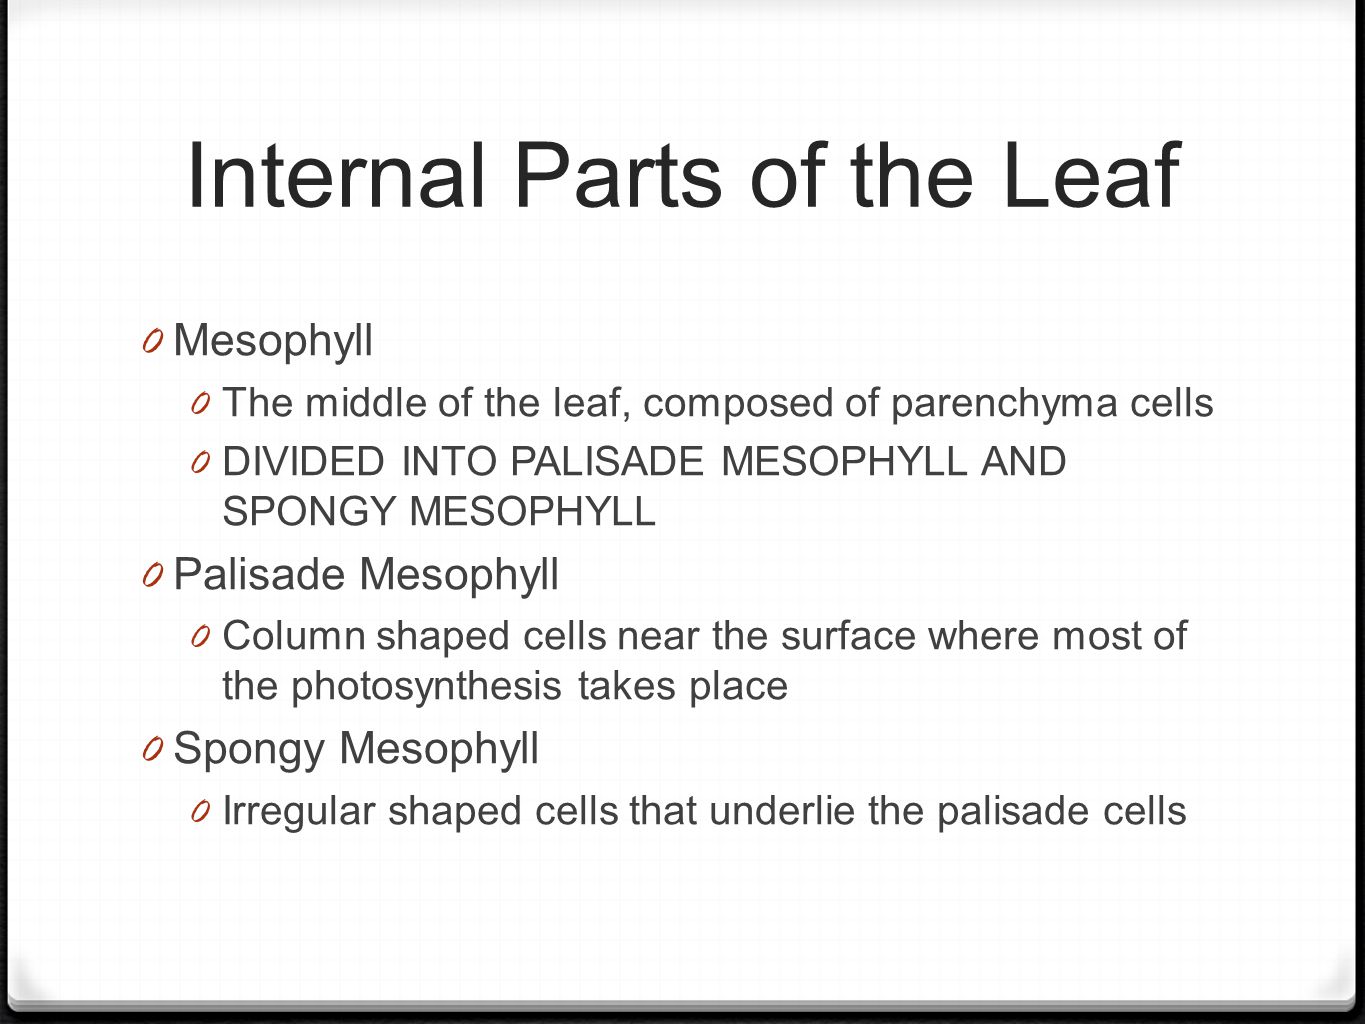 Internal Parts of the Leaf 0 Mesophyll 0 The middle of the leaf, composed of parenchyma cells 0 DIVIDED INTO PALISADE MESOPHYLL AND SPONGY MESOPHYLL 0 Palisade Mesophyll 0 Column shaped cells near the surface where most of the photosynthesis takes place 0 Spongy Mesophyll 0 Irregular shaped cells that underlie the palisade cells